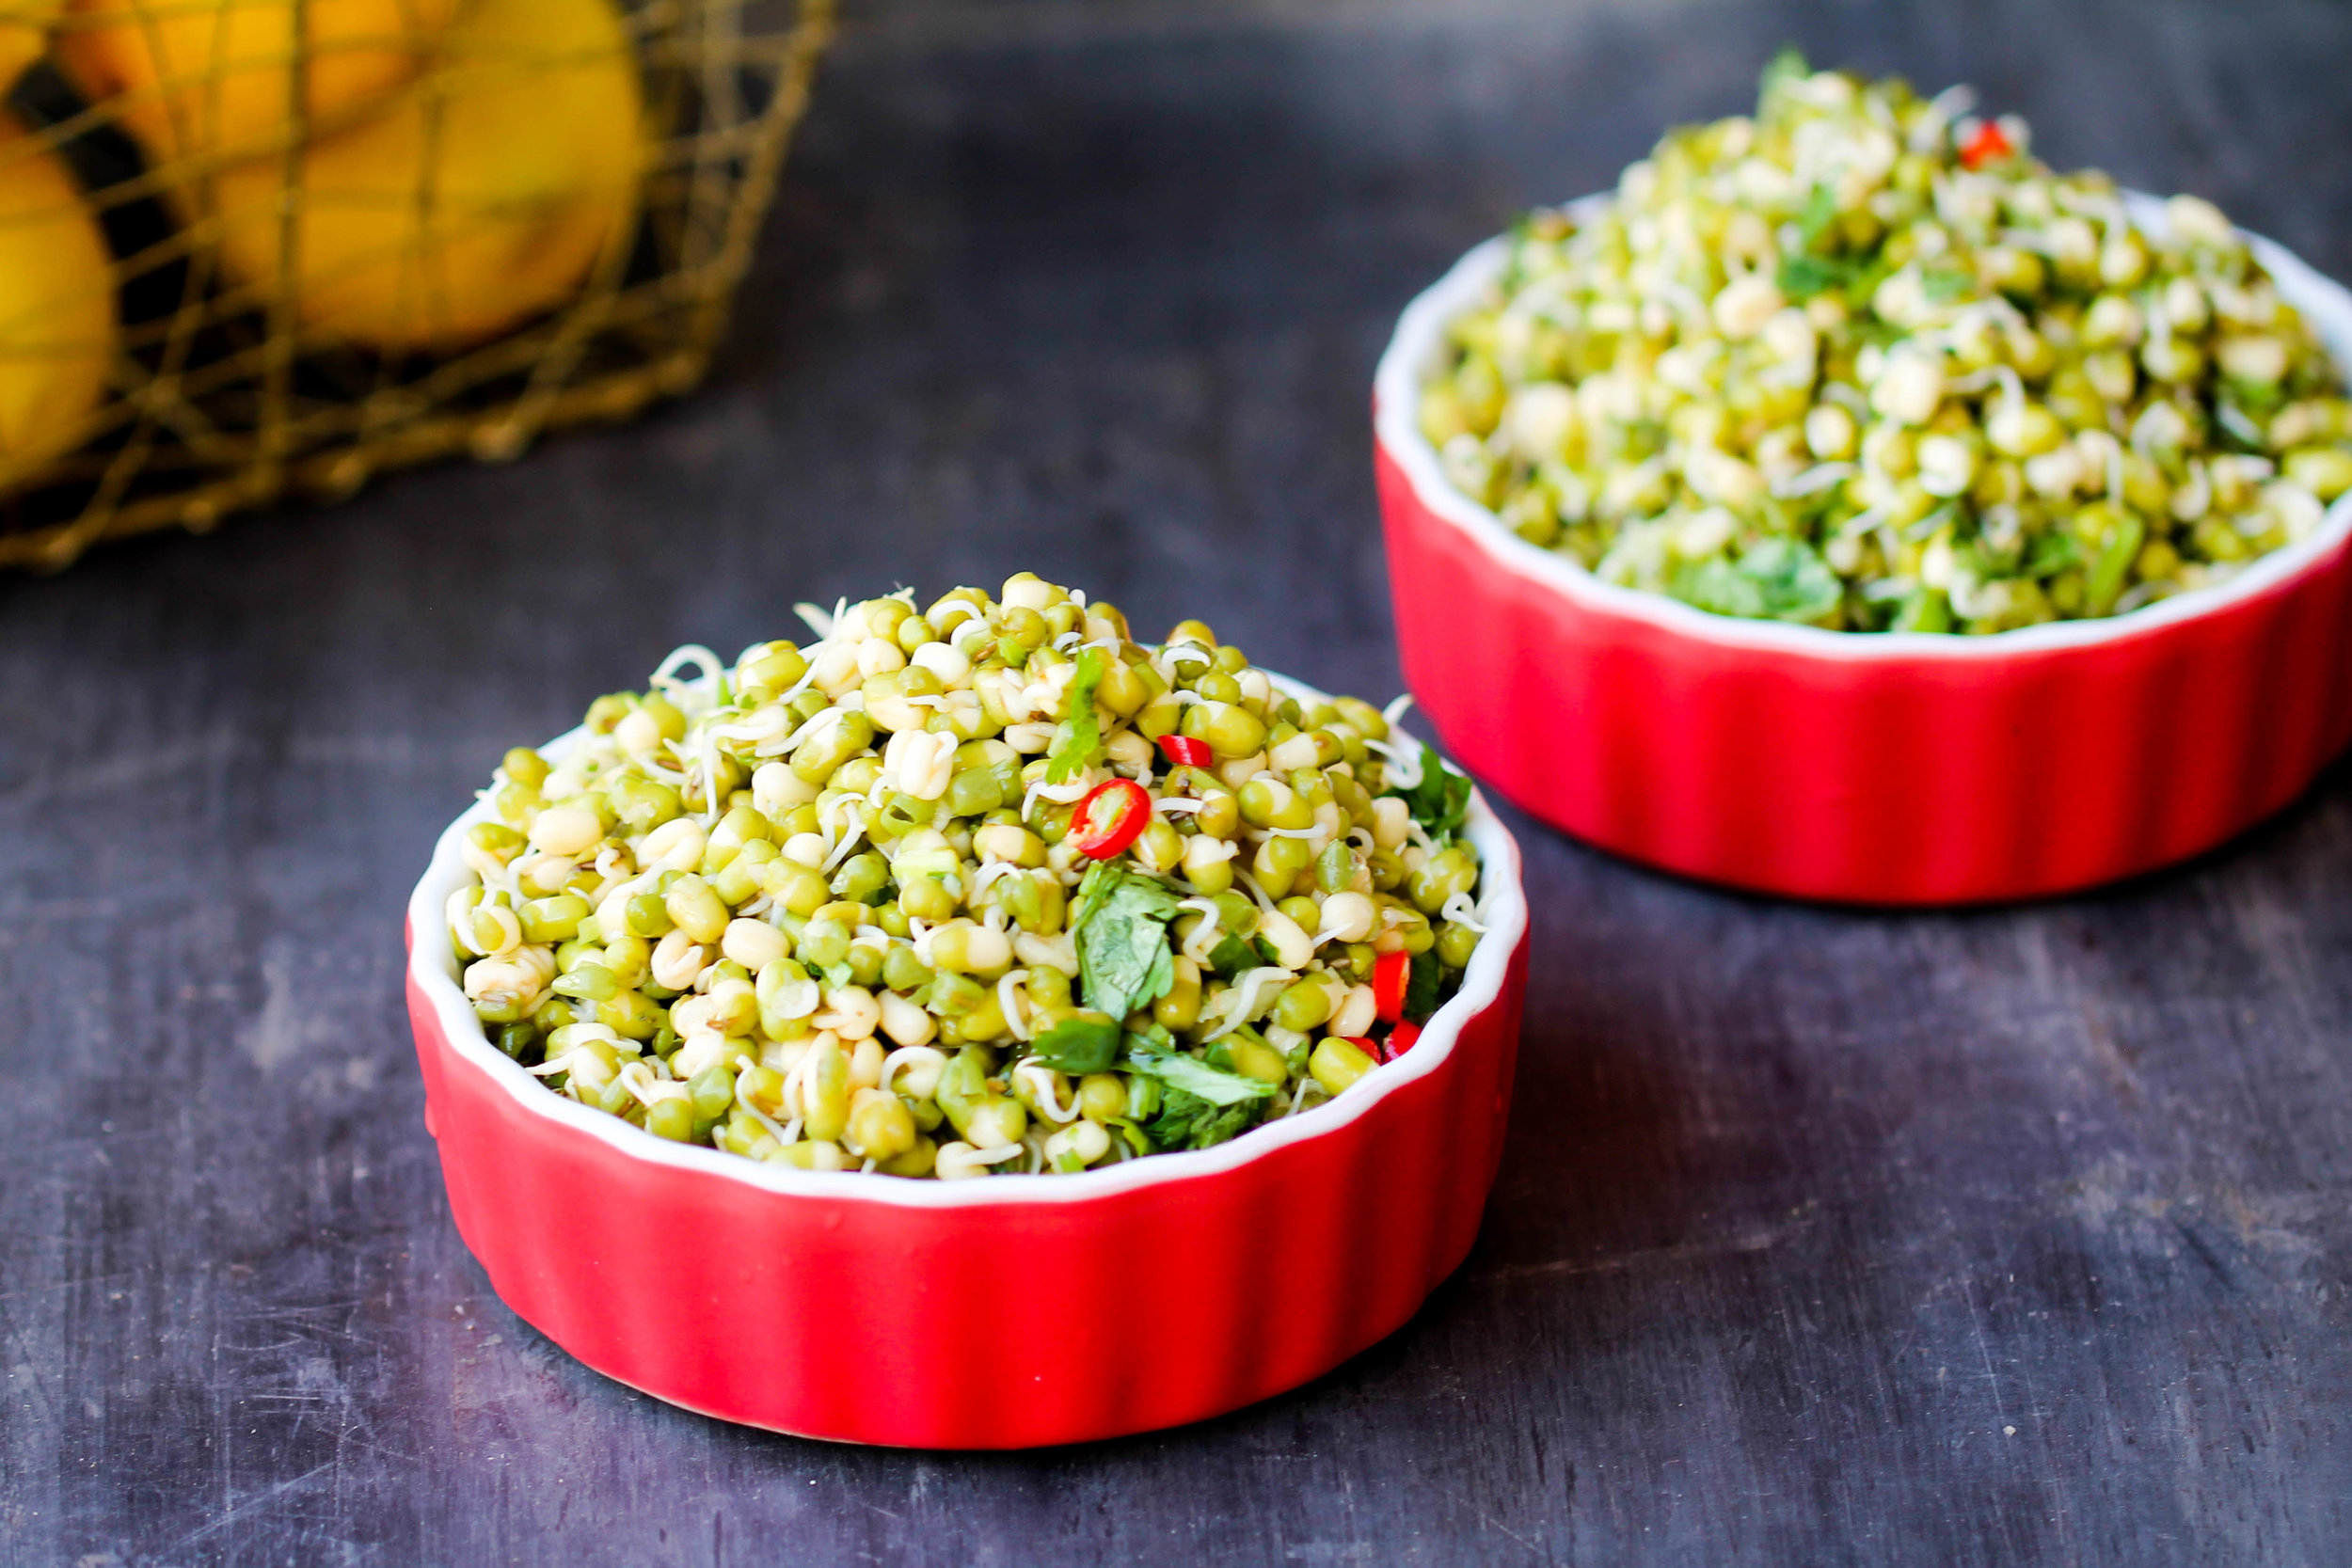 Sprouted Mung Bean Salad is easy, nutrient-dense, and great for a quick lunch! They are naturally vegan, gluten-free.